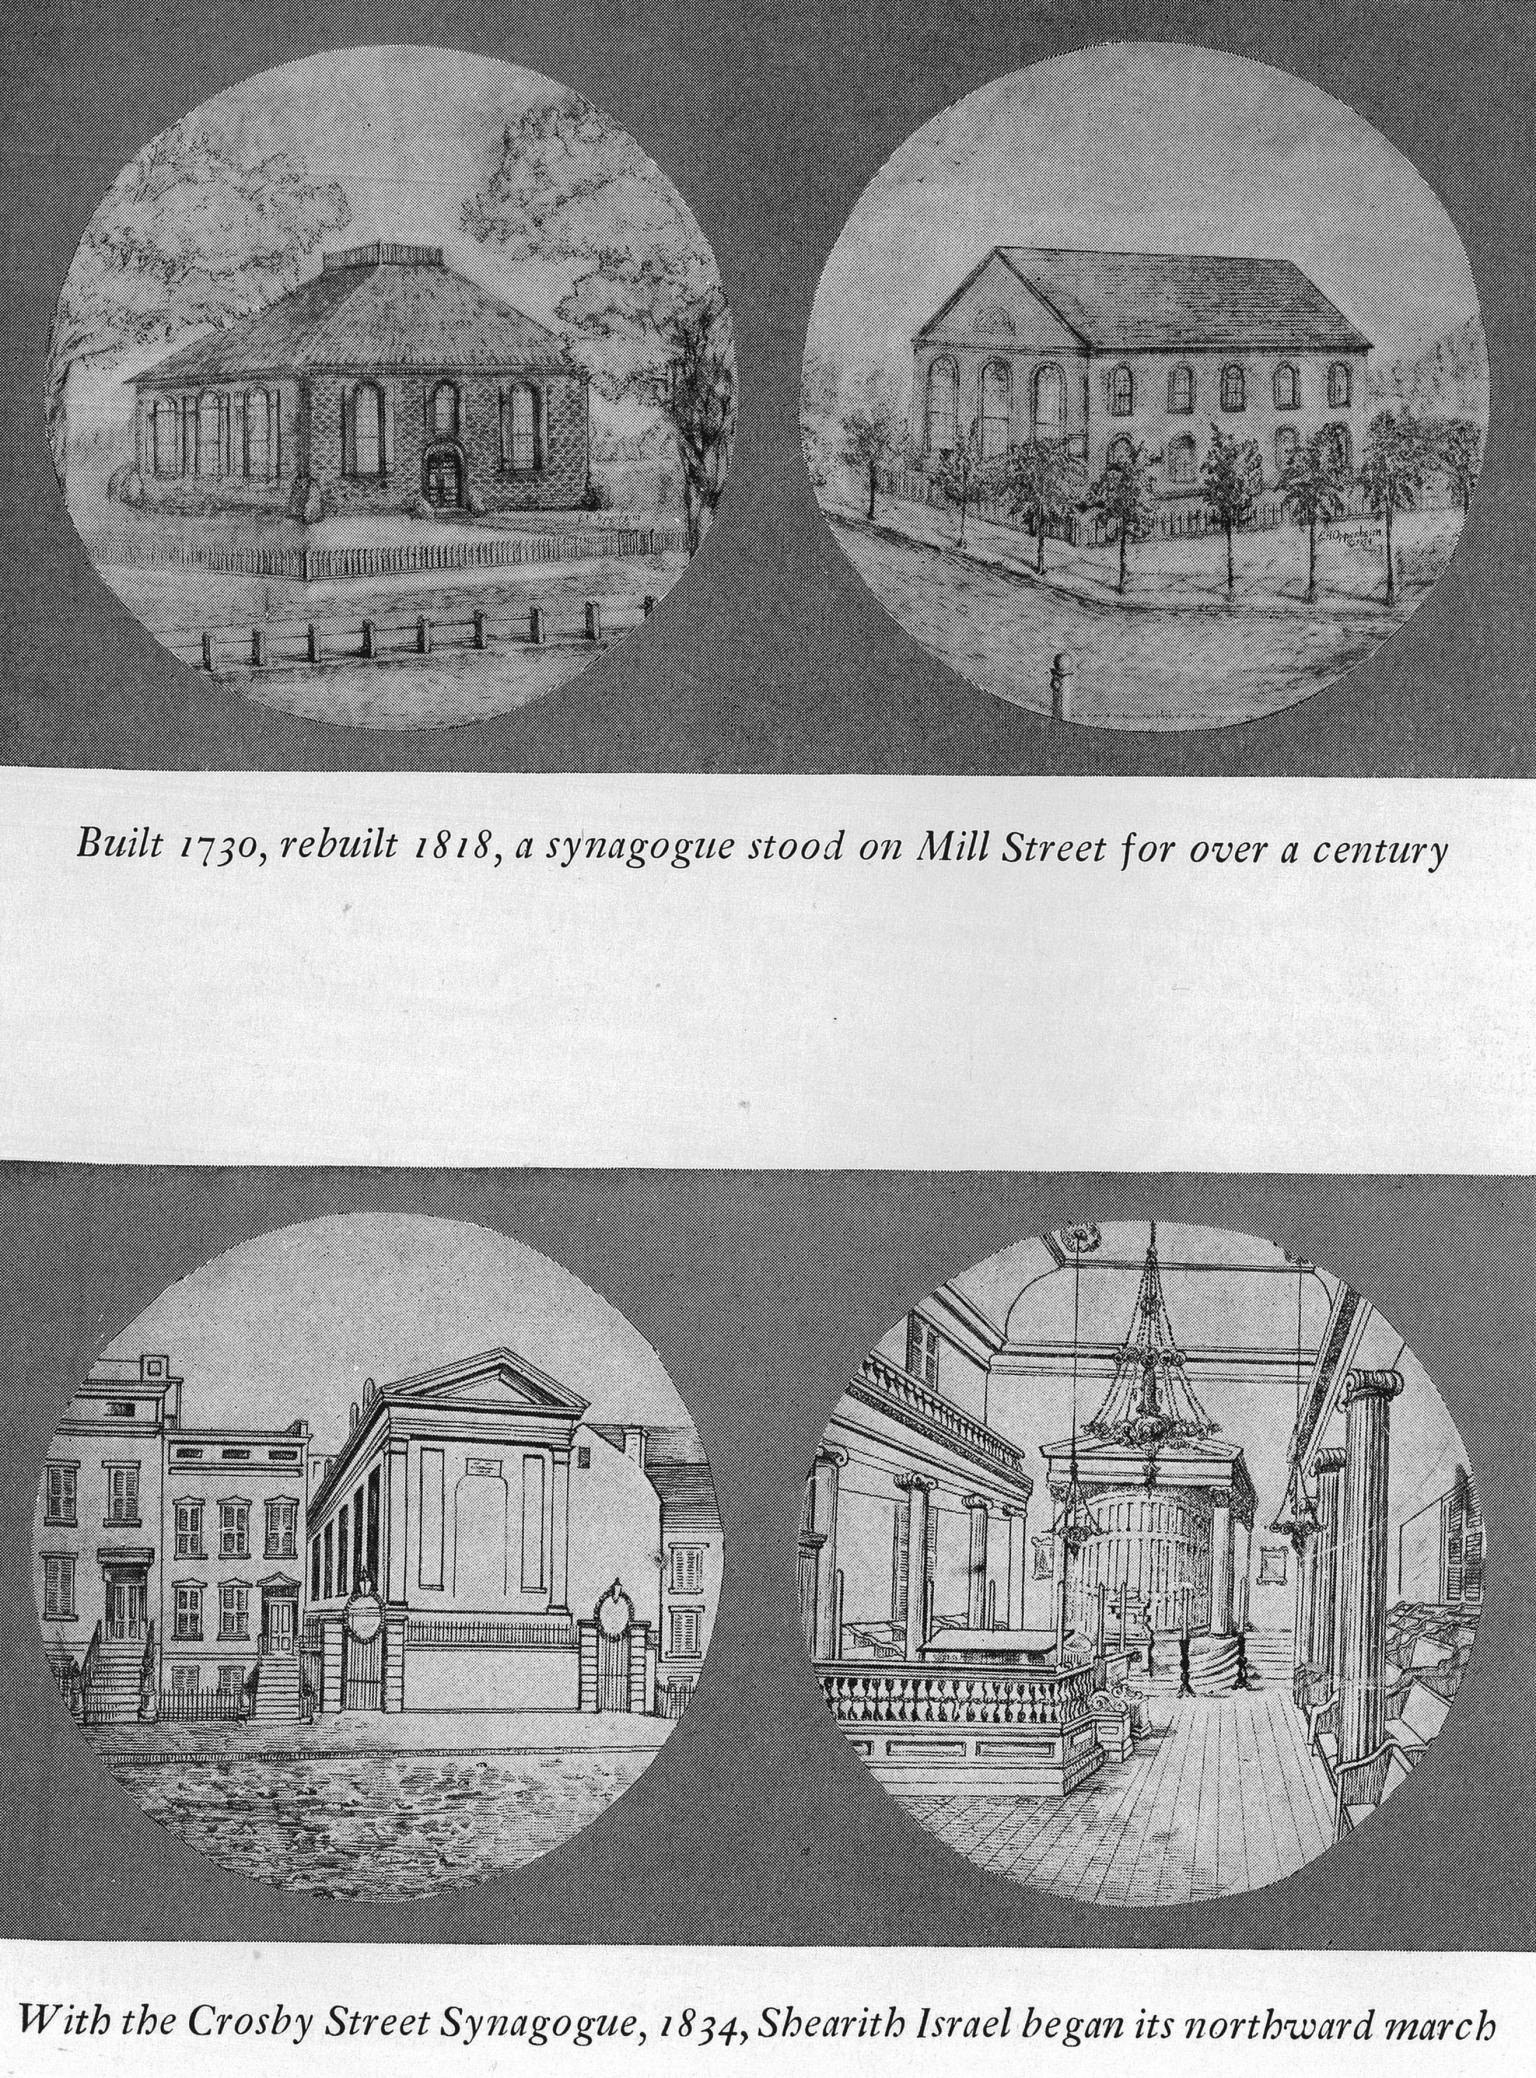 Two circular drawings of exterior of building surrounded by fence and trees and English caption; two circular drawings, one of exterior of buildings side-by-side and the other of interior of building with columns and balcony, with English caption underneath.  